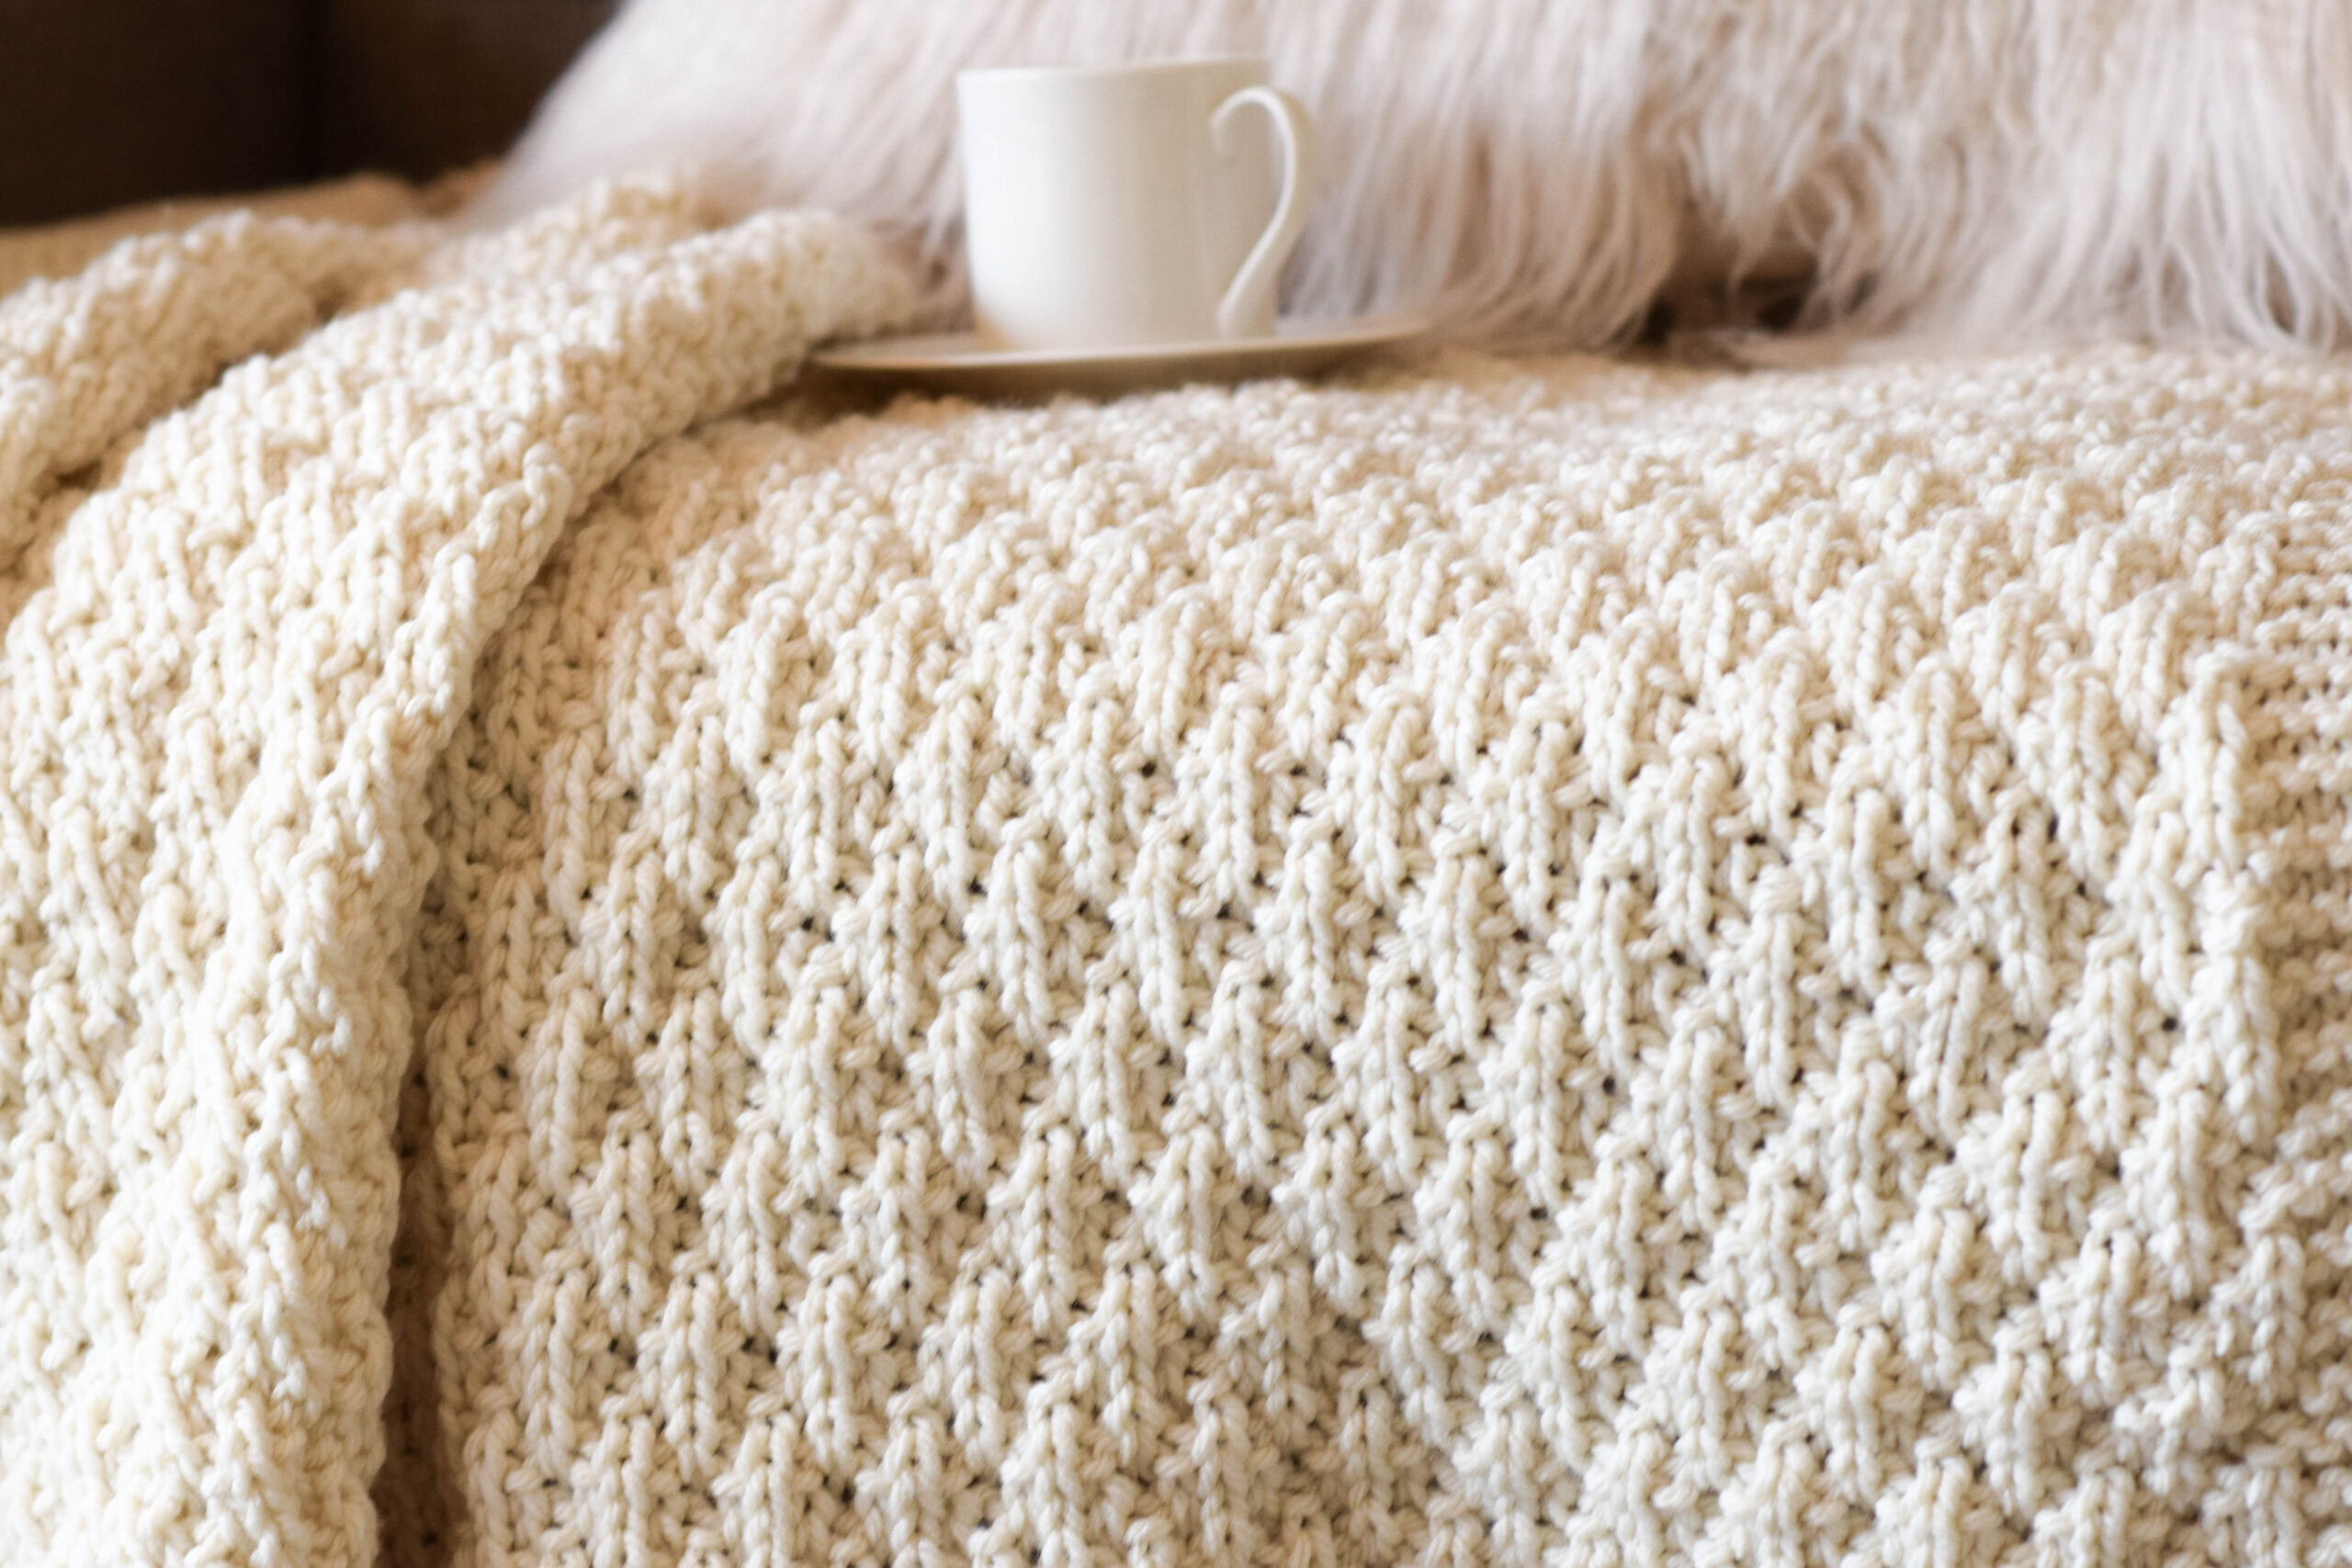 Free Blanket Knitting Pattern - Easy to Knit Afghan for Worsted or